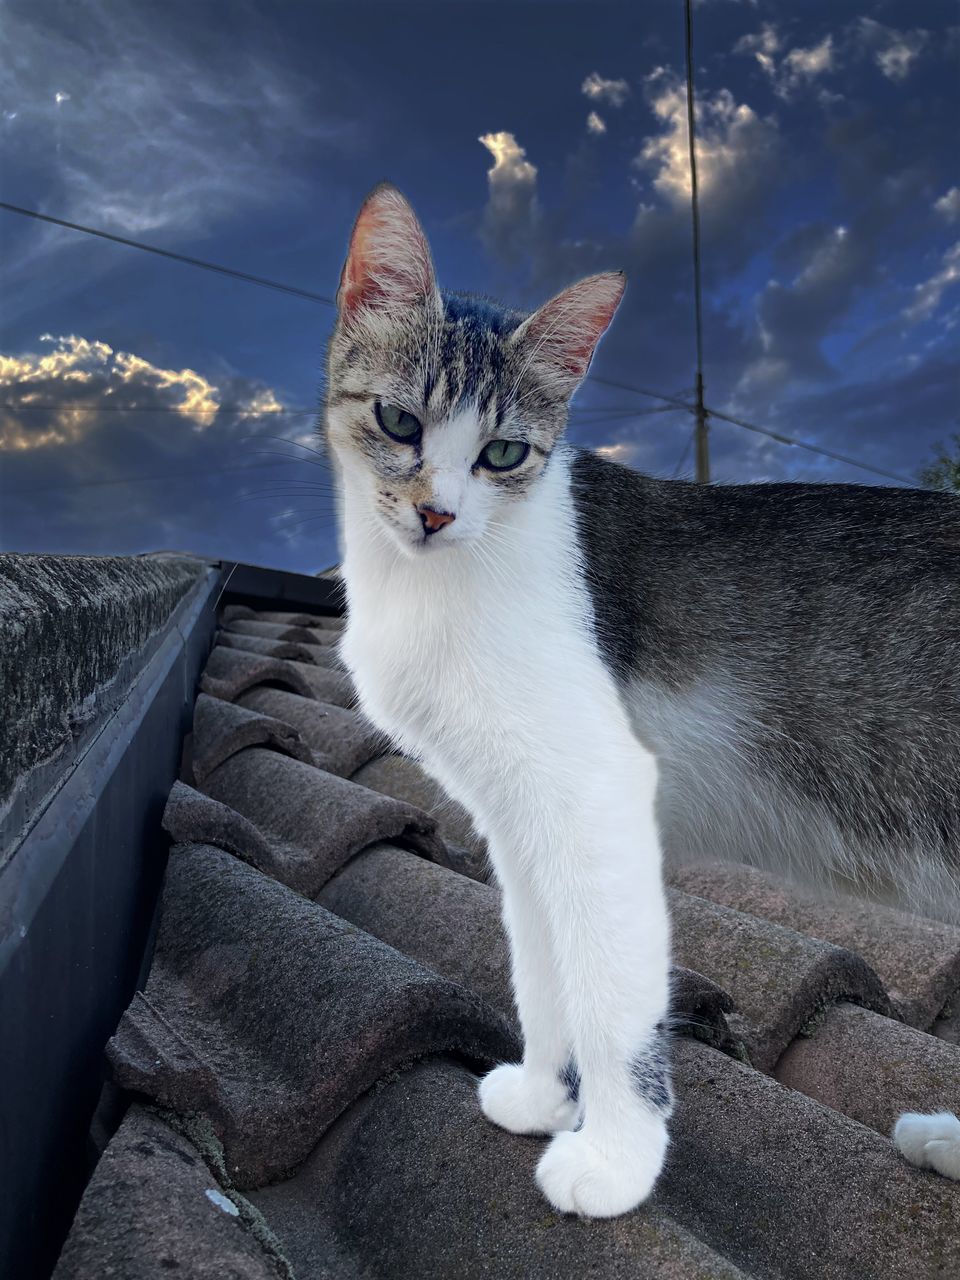 pet, animal, mammal, animal themes, domestic animals, one animal, cat, domestic cat, feline, whiskers, sky, cloud, small to medium-sized cats, felidae, portrait, no people, looking at camera, blue, white, nature, sitting, looking, carnivore, animal body part